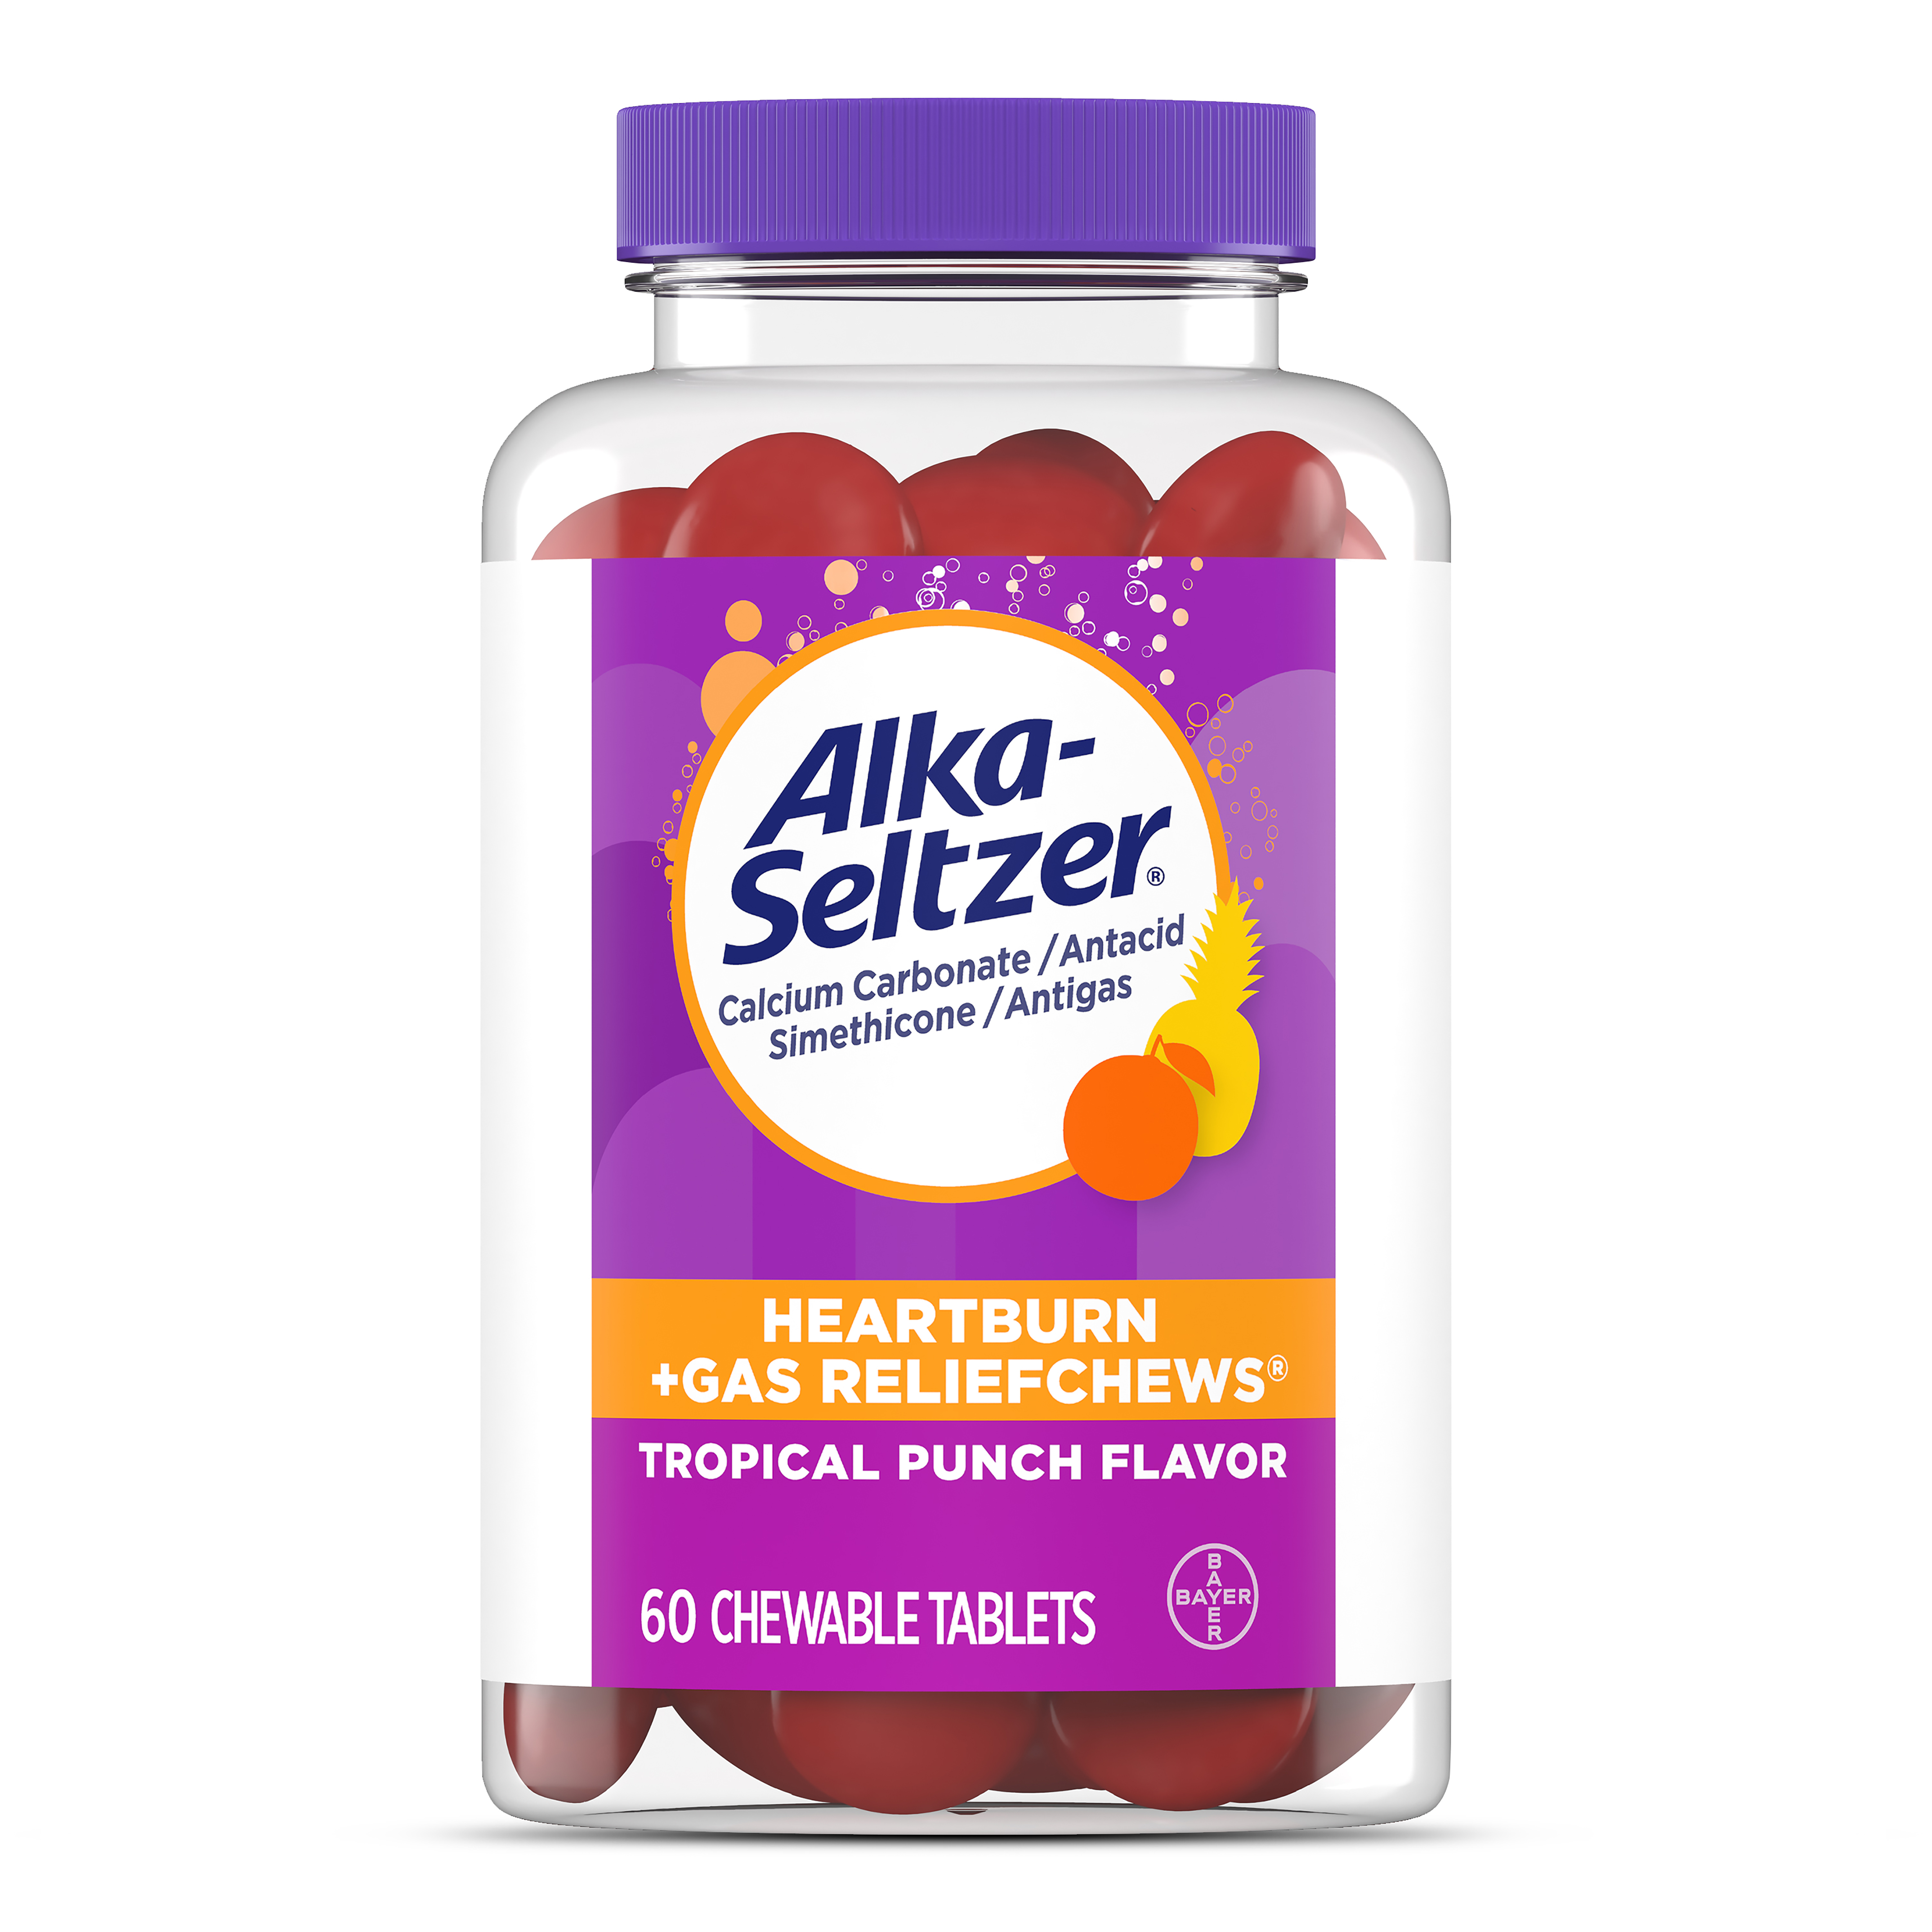 Alka-Seltzer Heartburn Relief + Gas Relief Chews, Tropical Punch 60 Ct - image 1 of 9